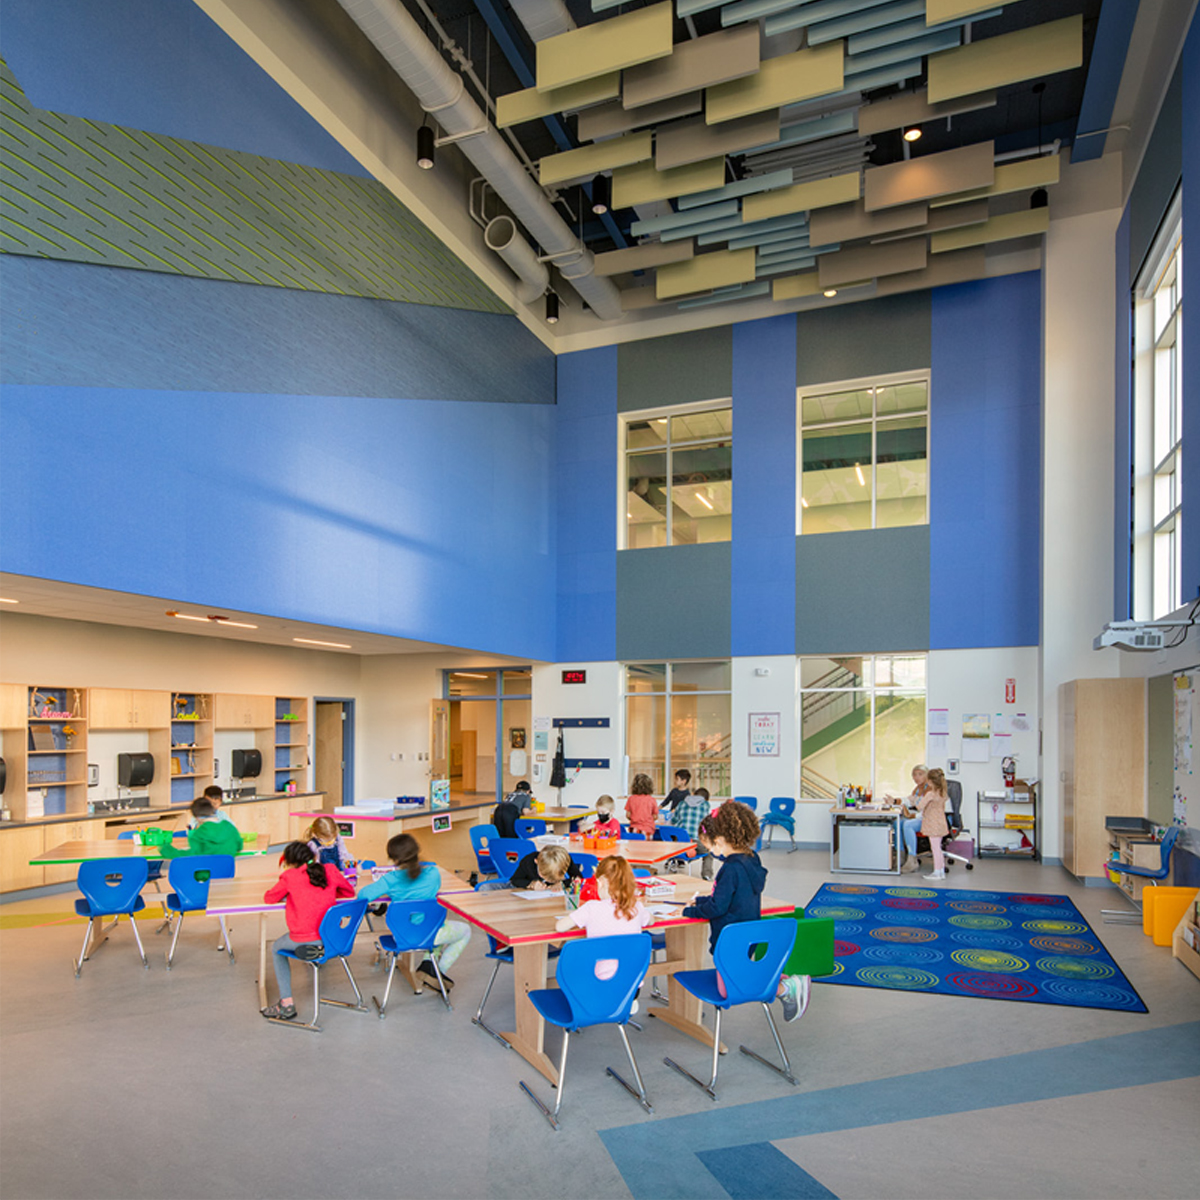 Cunniff Elementary School is substantially complete